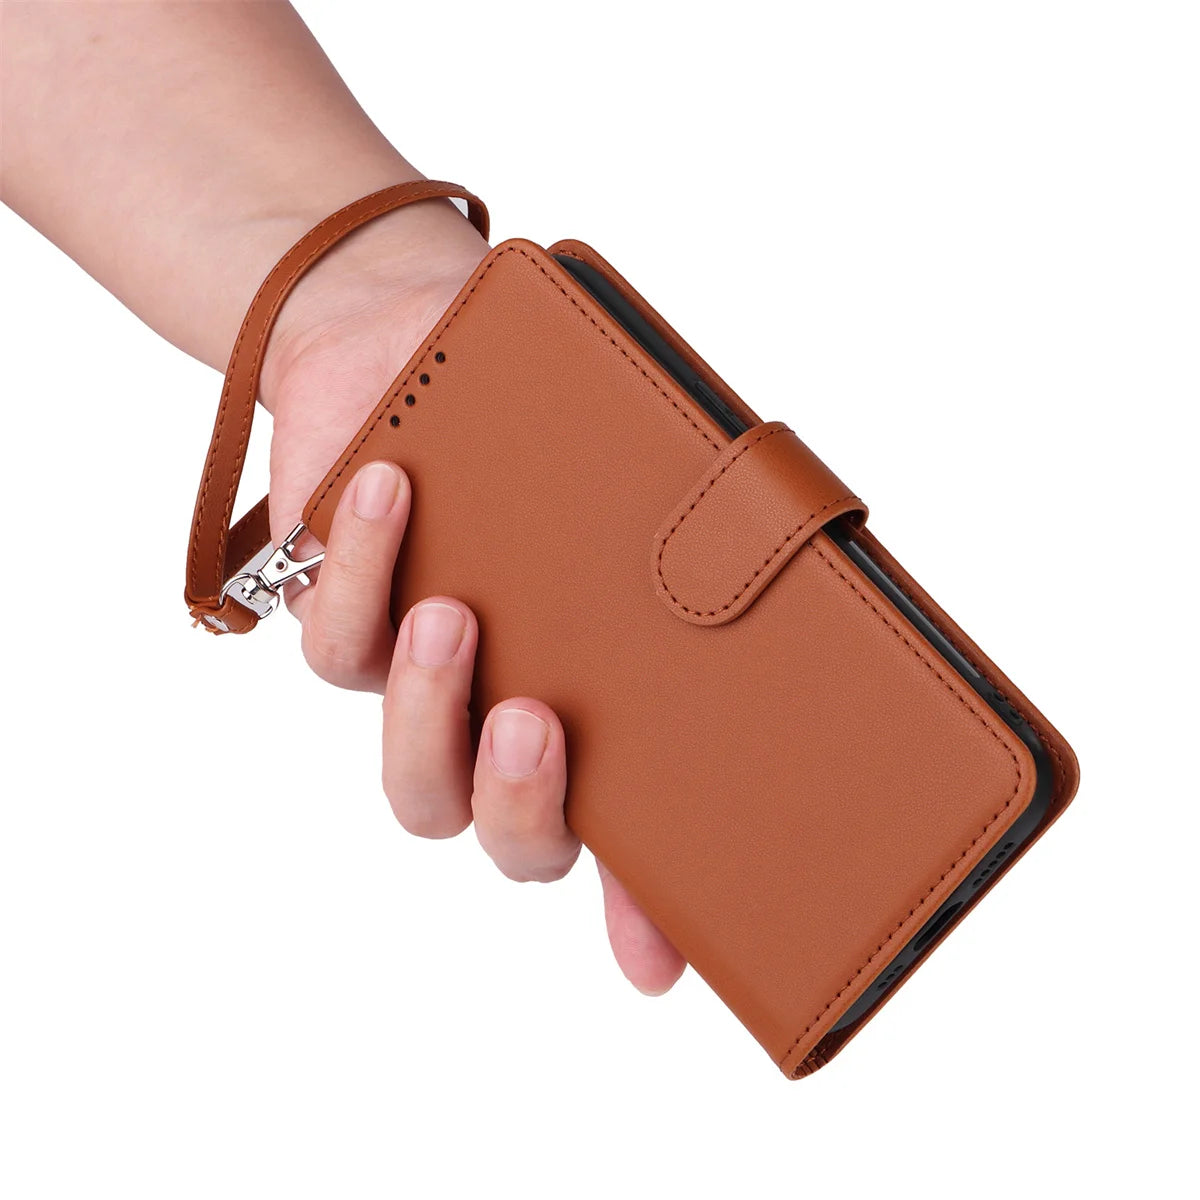 2 in 1 Detachable Magnetic Slim Wallet Leather Galaxy Case with Wrist Strap - DealJustDeal